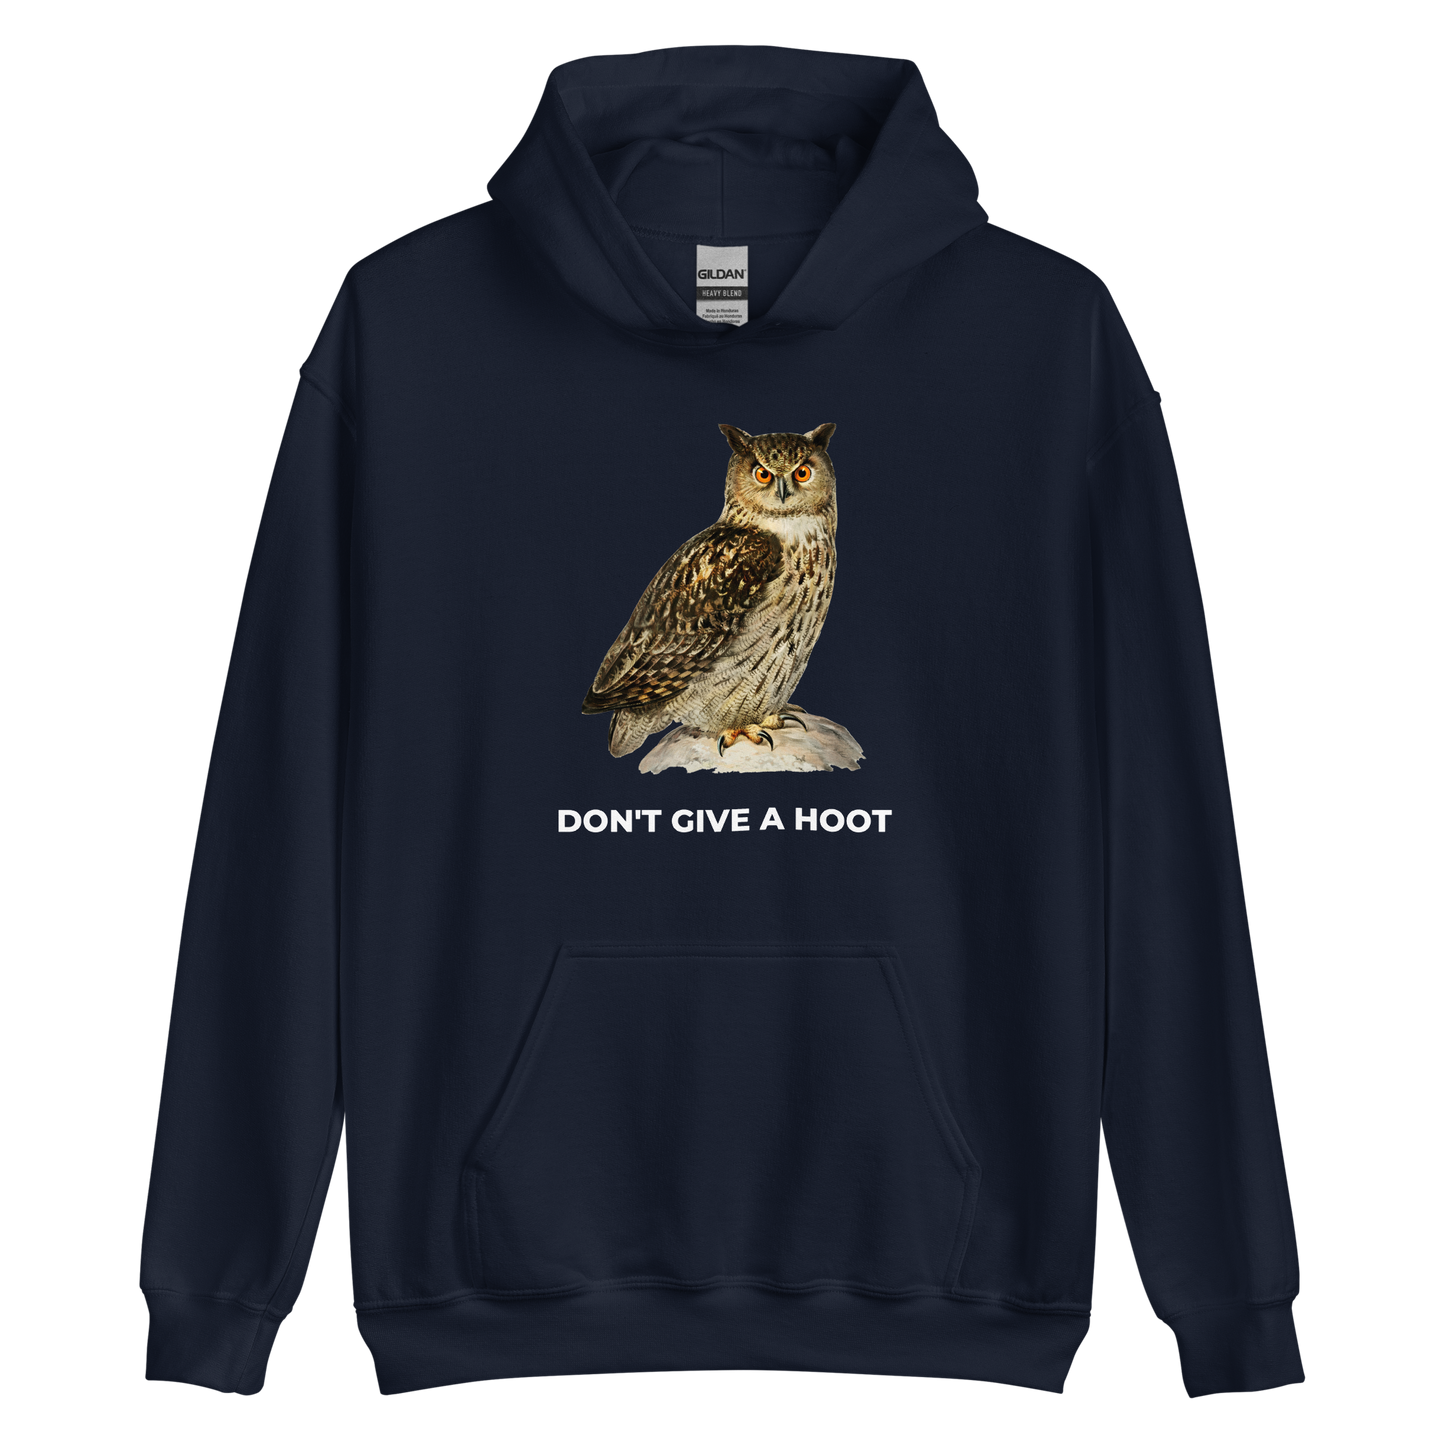 Navy Owl Hoodie featuring a captivating Don't Give A Hoot graphic on the chest - Funny Graphic Owl Hoodies - Boozy Fox